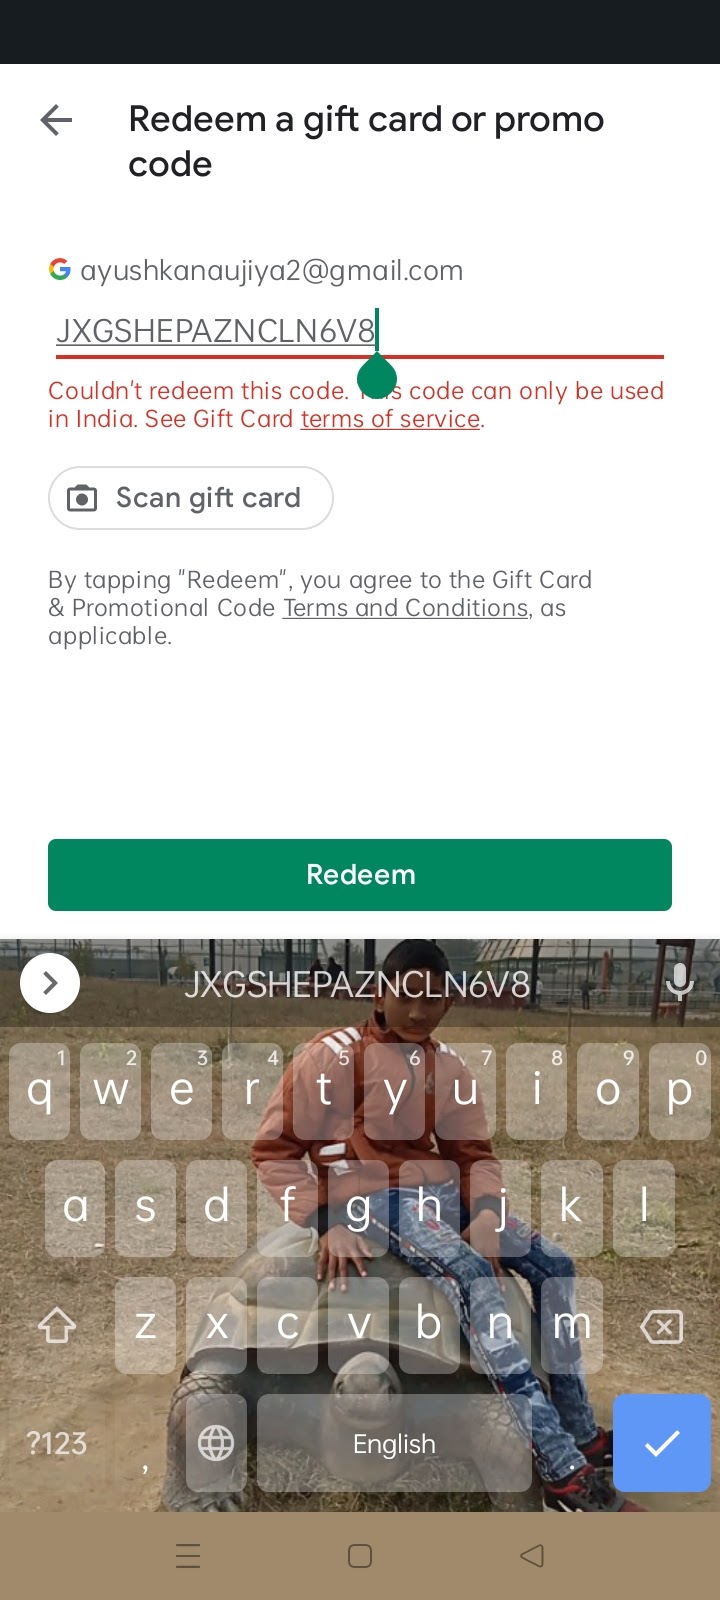 I messed up the redemption code - Google Play Community